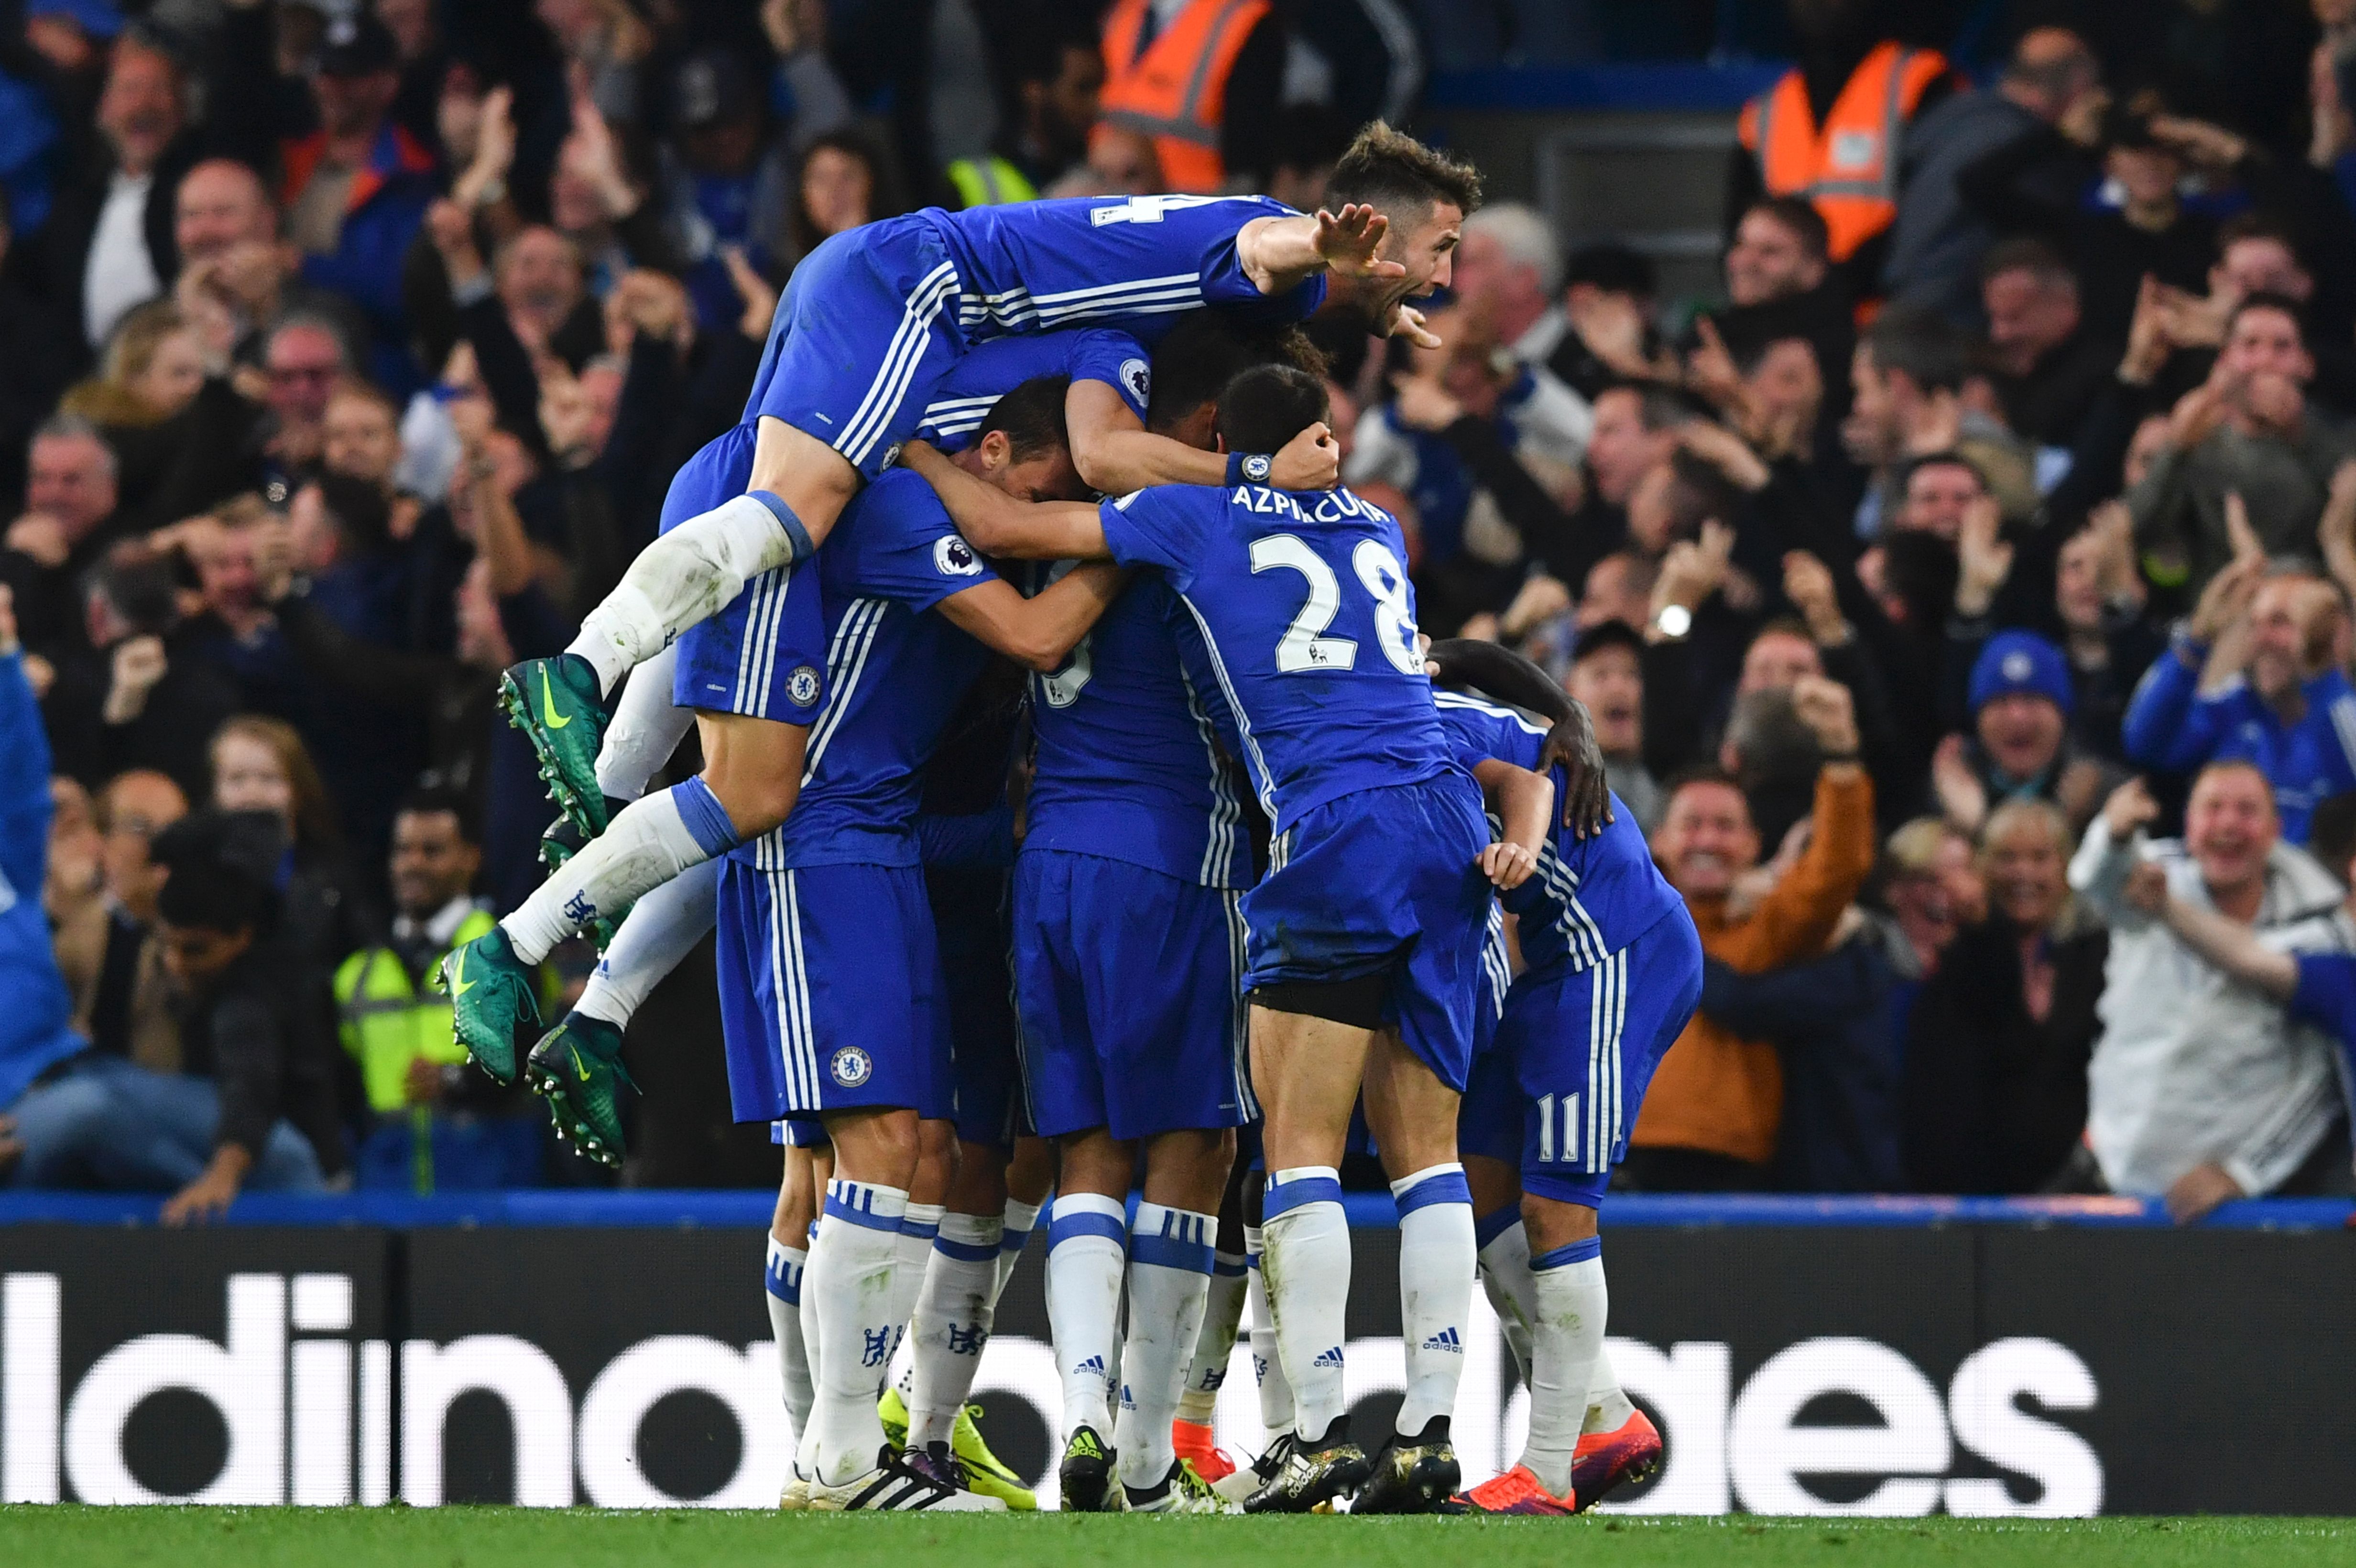 Chelsea's English defender Gary Cahill (top) jumps onto the huddle to join the celebrates after Chelsea's French midfielder N'Golo Kante scored their fourth goal during the English Premier League football match between Chelsea and Manchester United at Stamford Bridge in London on October 23, 2016. / AFP / BEN STANSALL / RESTRICTED TO EDITORIAL USE. No use with unauthorized audio, video, data, fixture lists, club/league logos or 'live' services. Online in-match use limited to 75 images, no video emulation. No use in betting, games or single club/league/player publications.  /         (Photo credit should read BEN STANSALL/AFP/Getty Images)